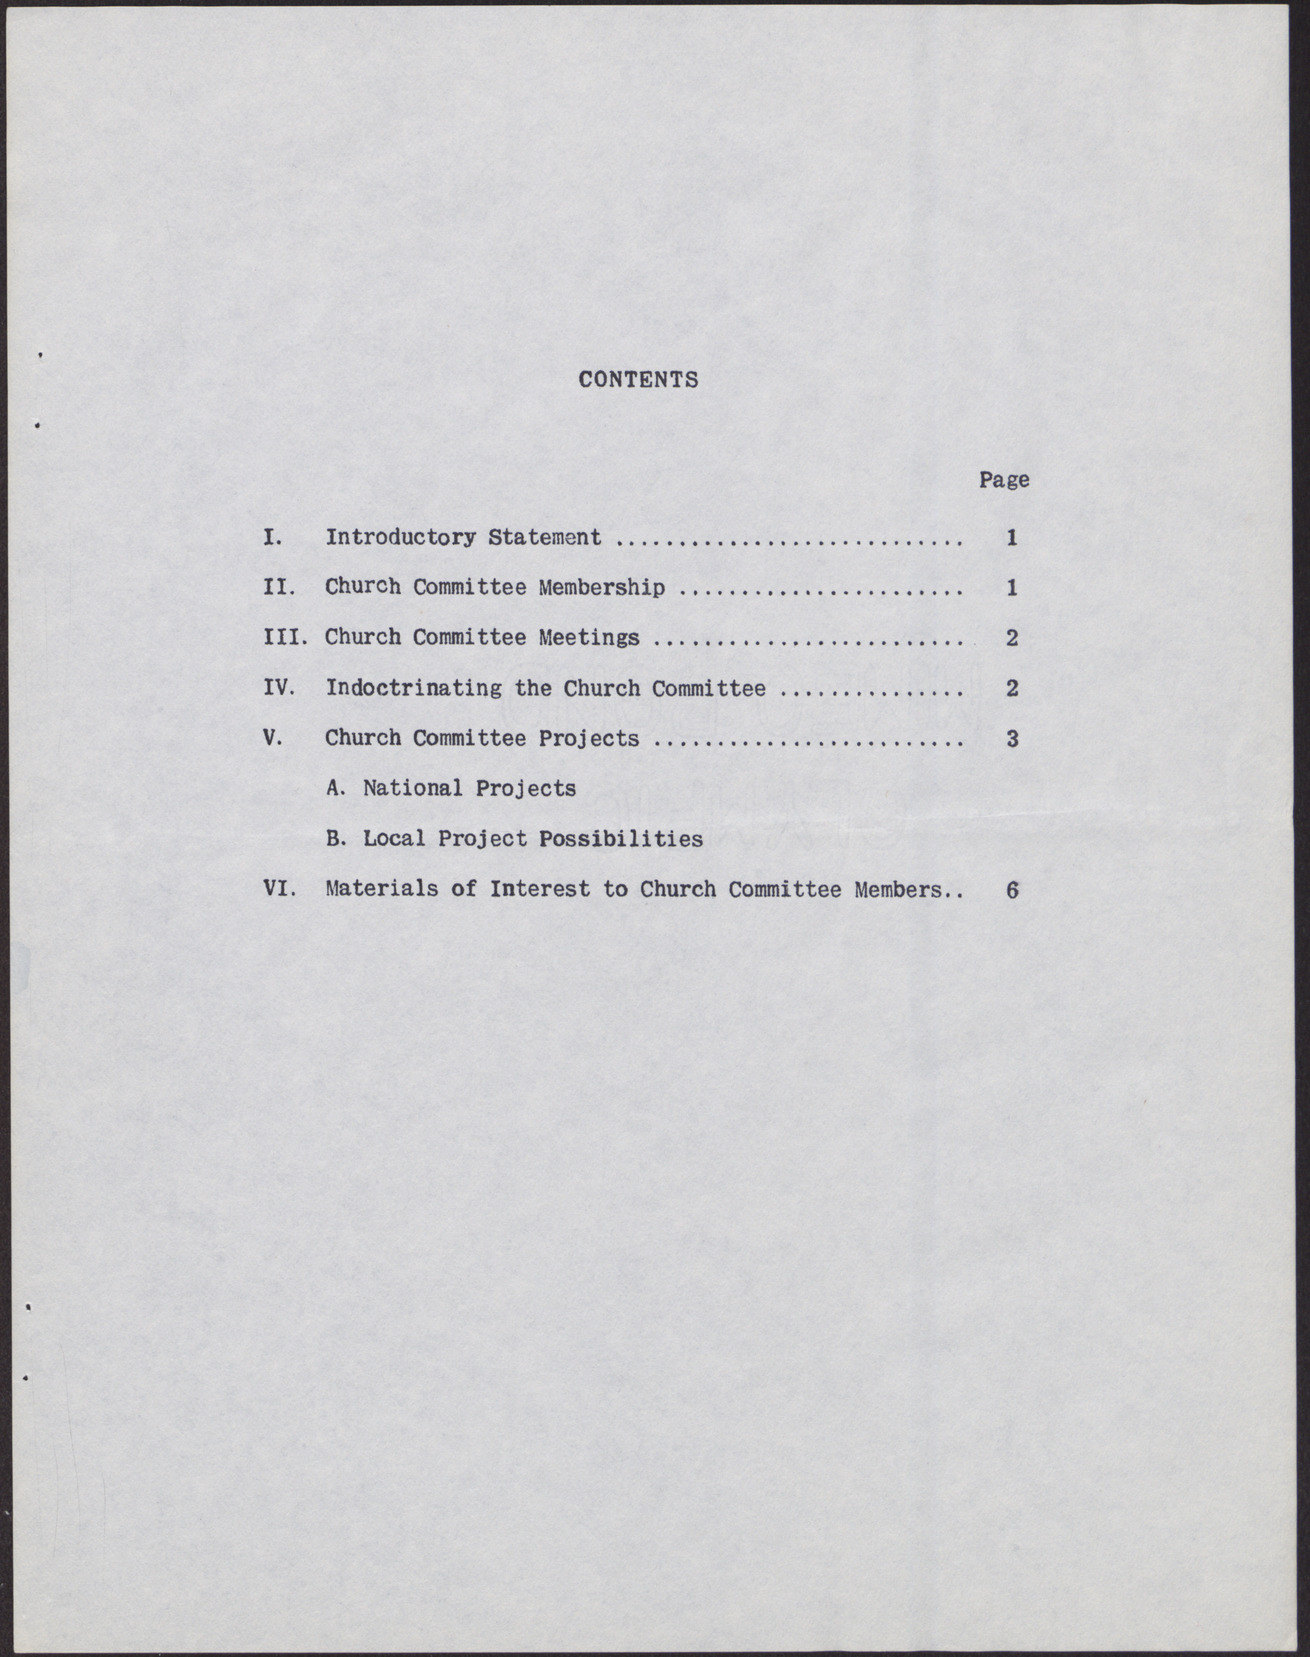 Program Suggestions for Branch Church Committees of the National Association for the Advancement of Colored People (9 pages), no date, page 3